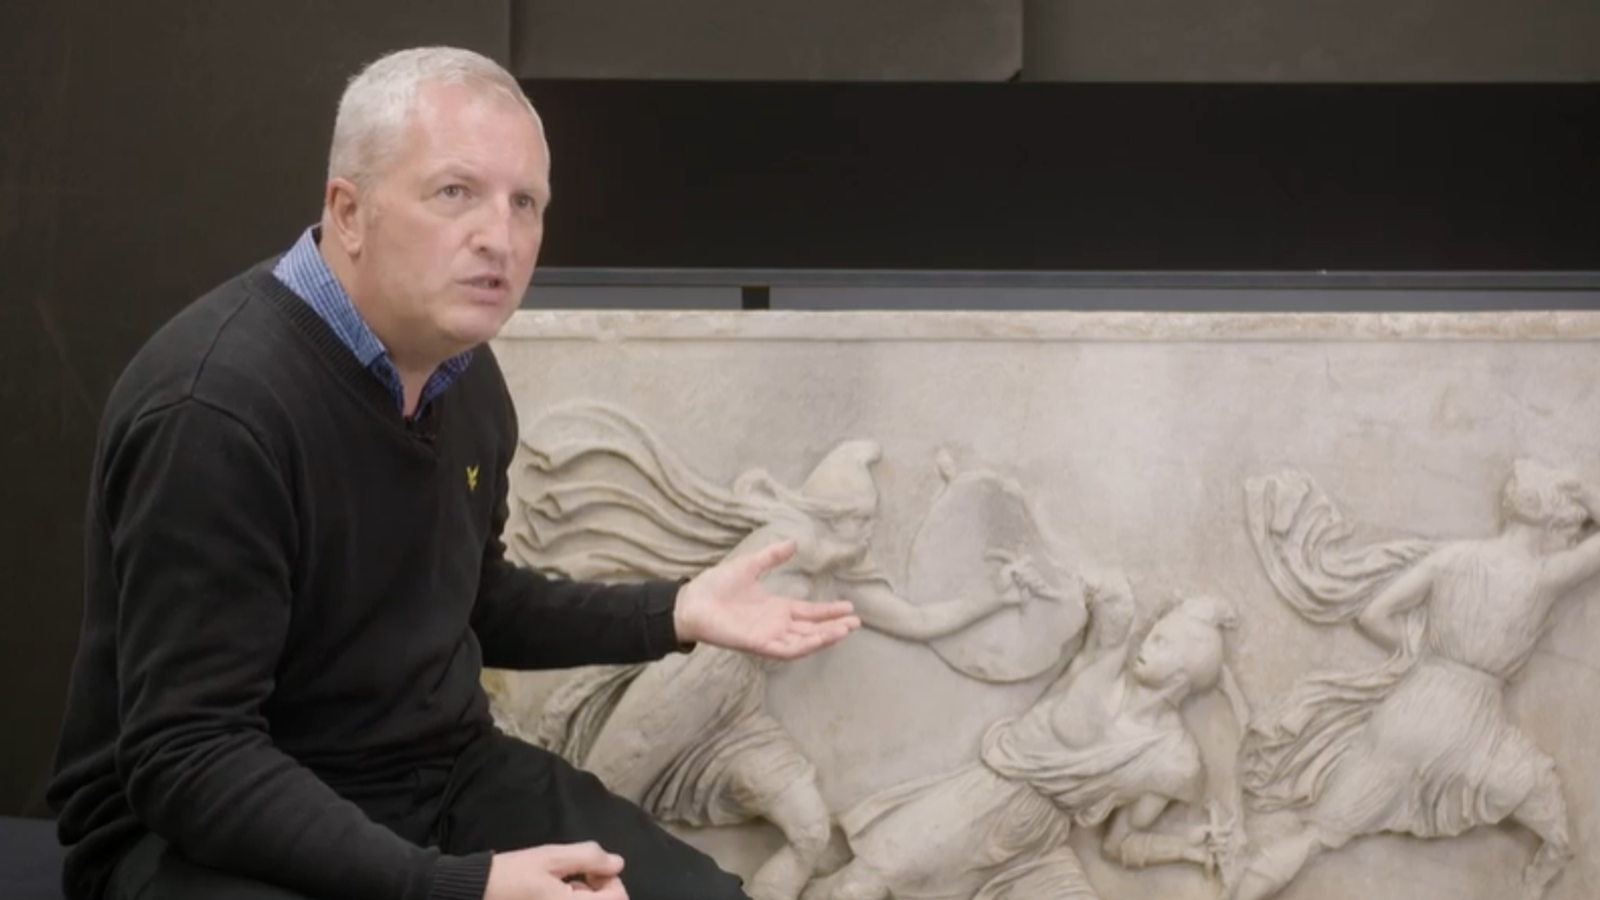 British Museum staff member sacked after treasures vanished named as senior curator